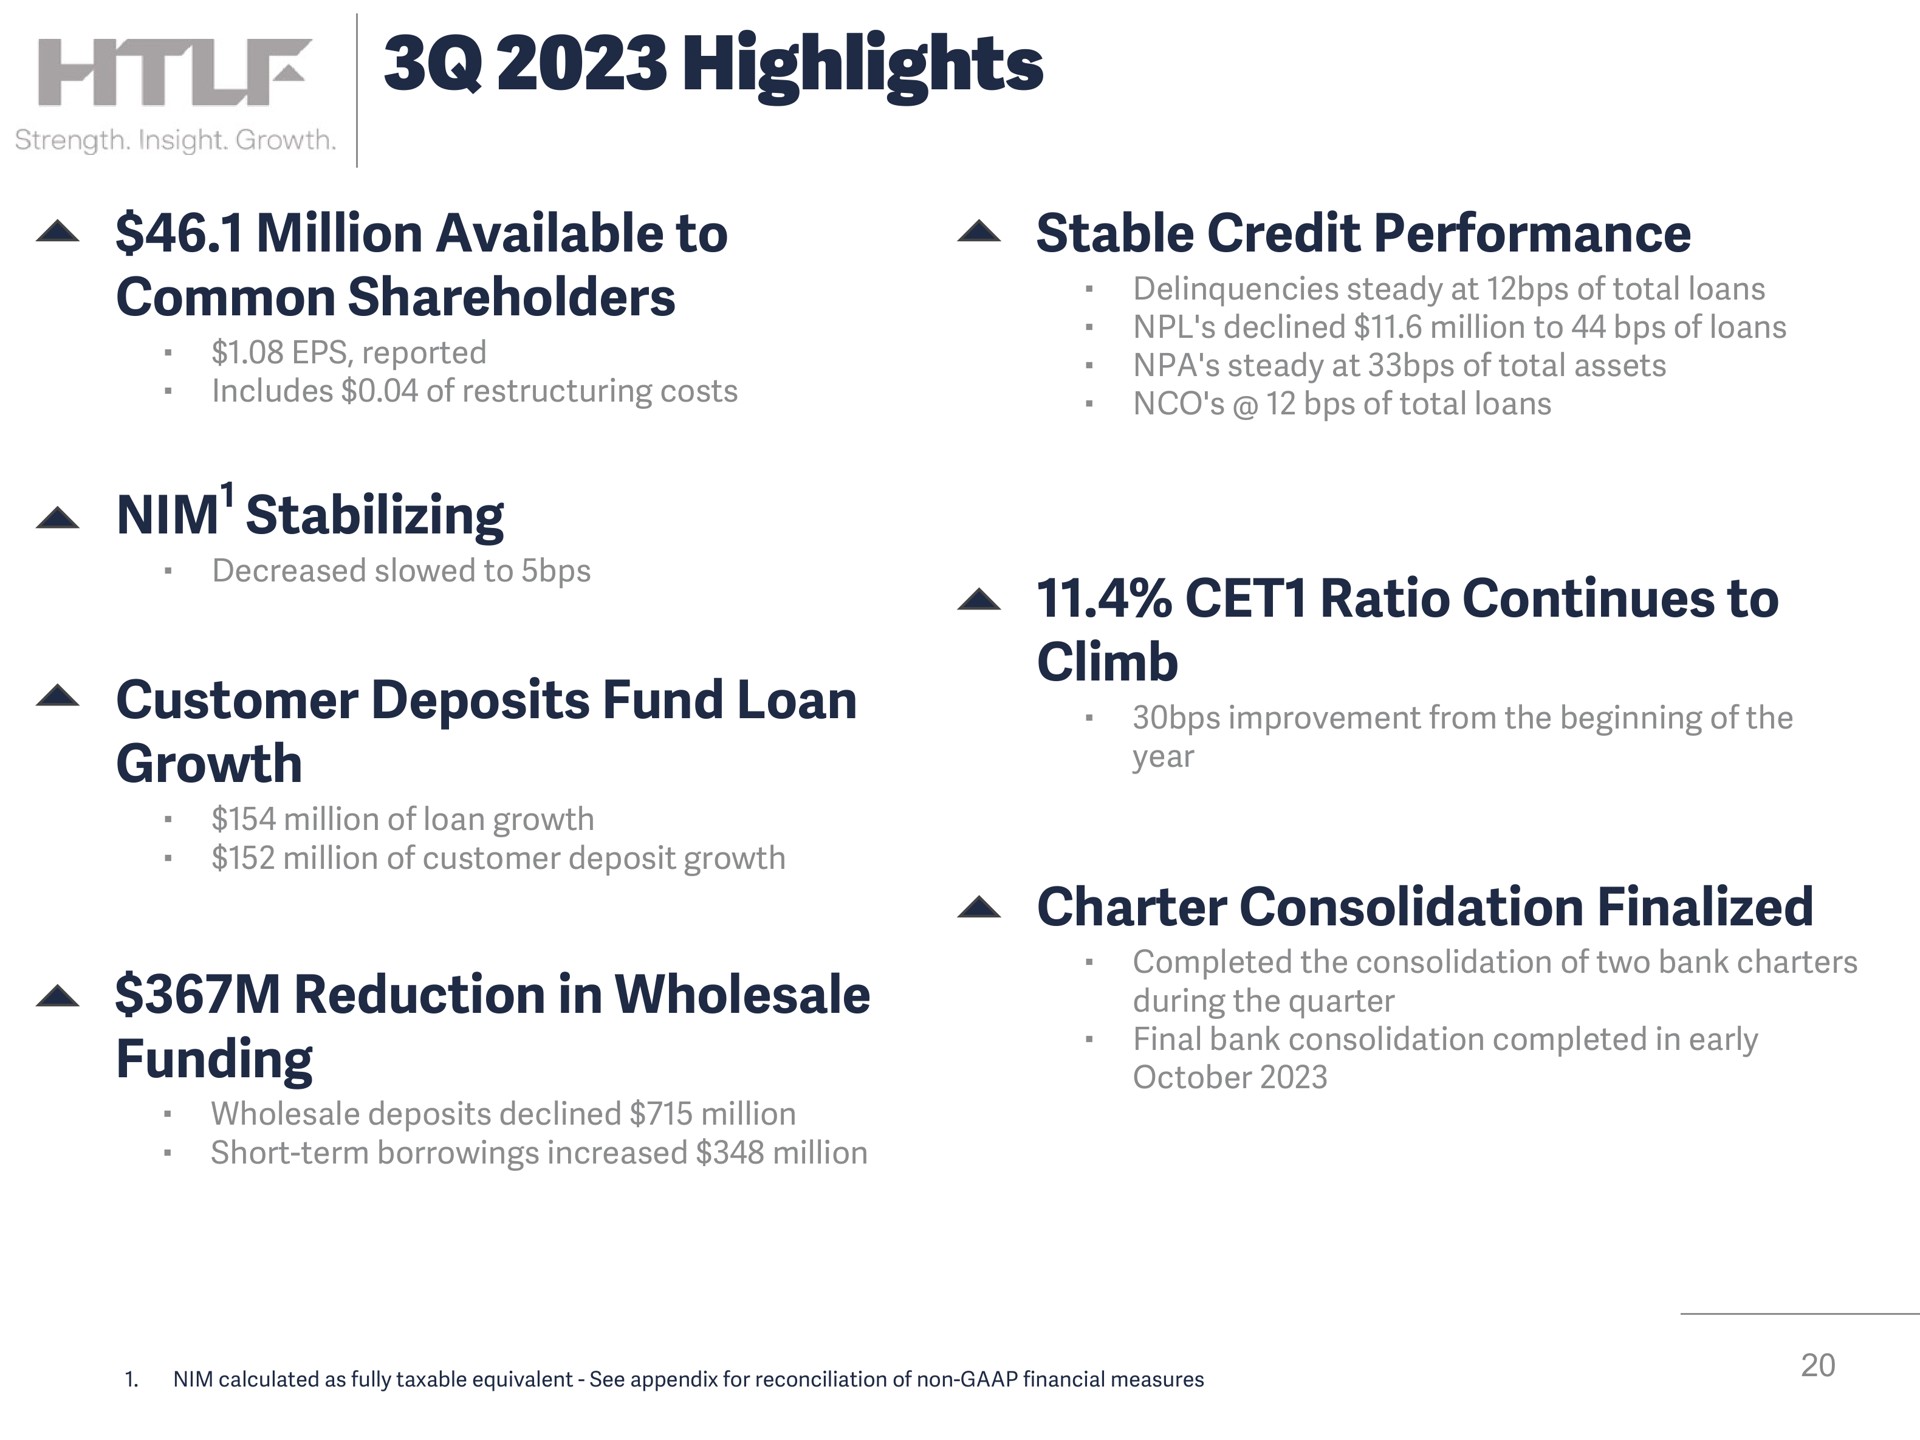 highlights million available to common shareholders nim stabilizing customer deposits fund loan growth reduction in wholesale funding stable credit performance ratio continues to climb charter consolidation finalized highlights nim year a during the quarter | Heartland Financial USA